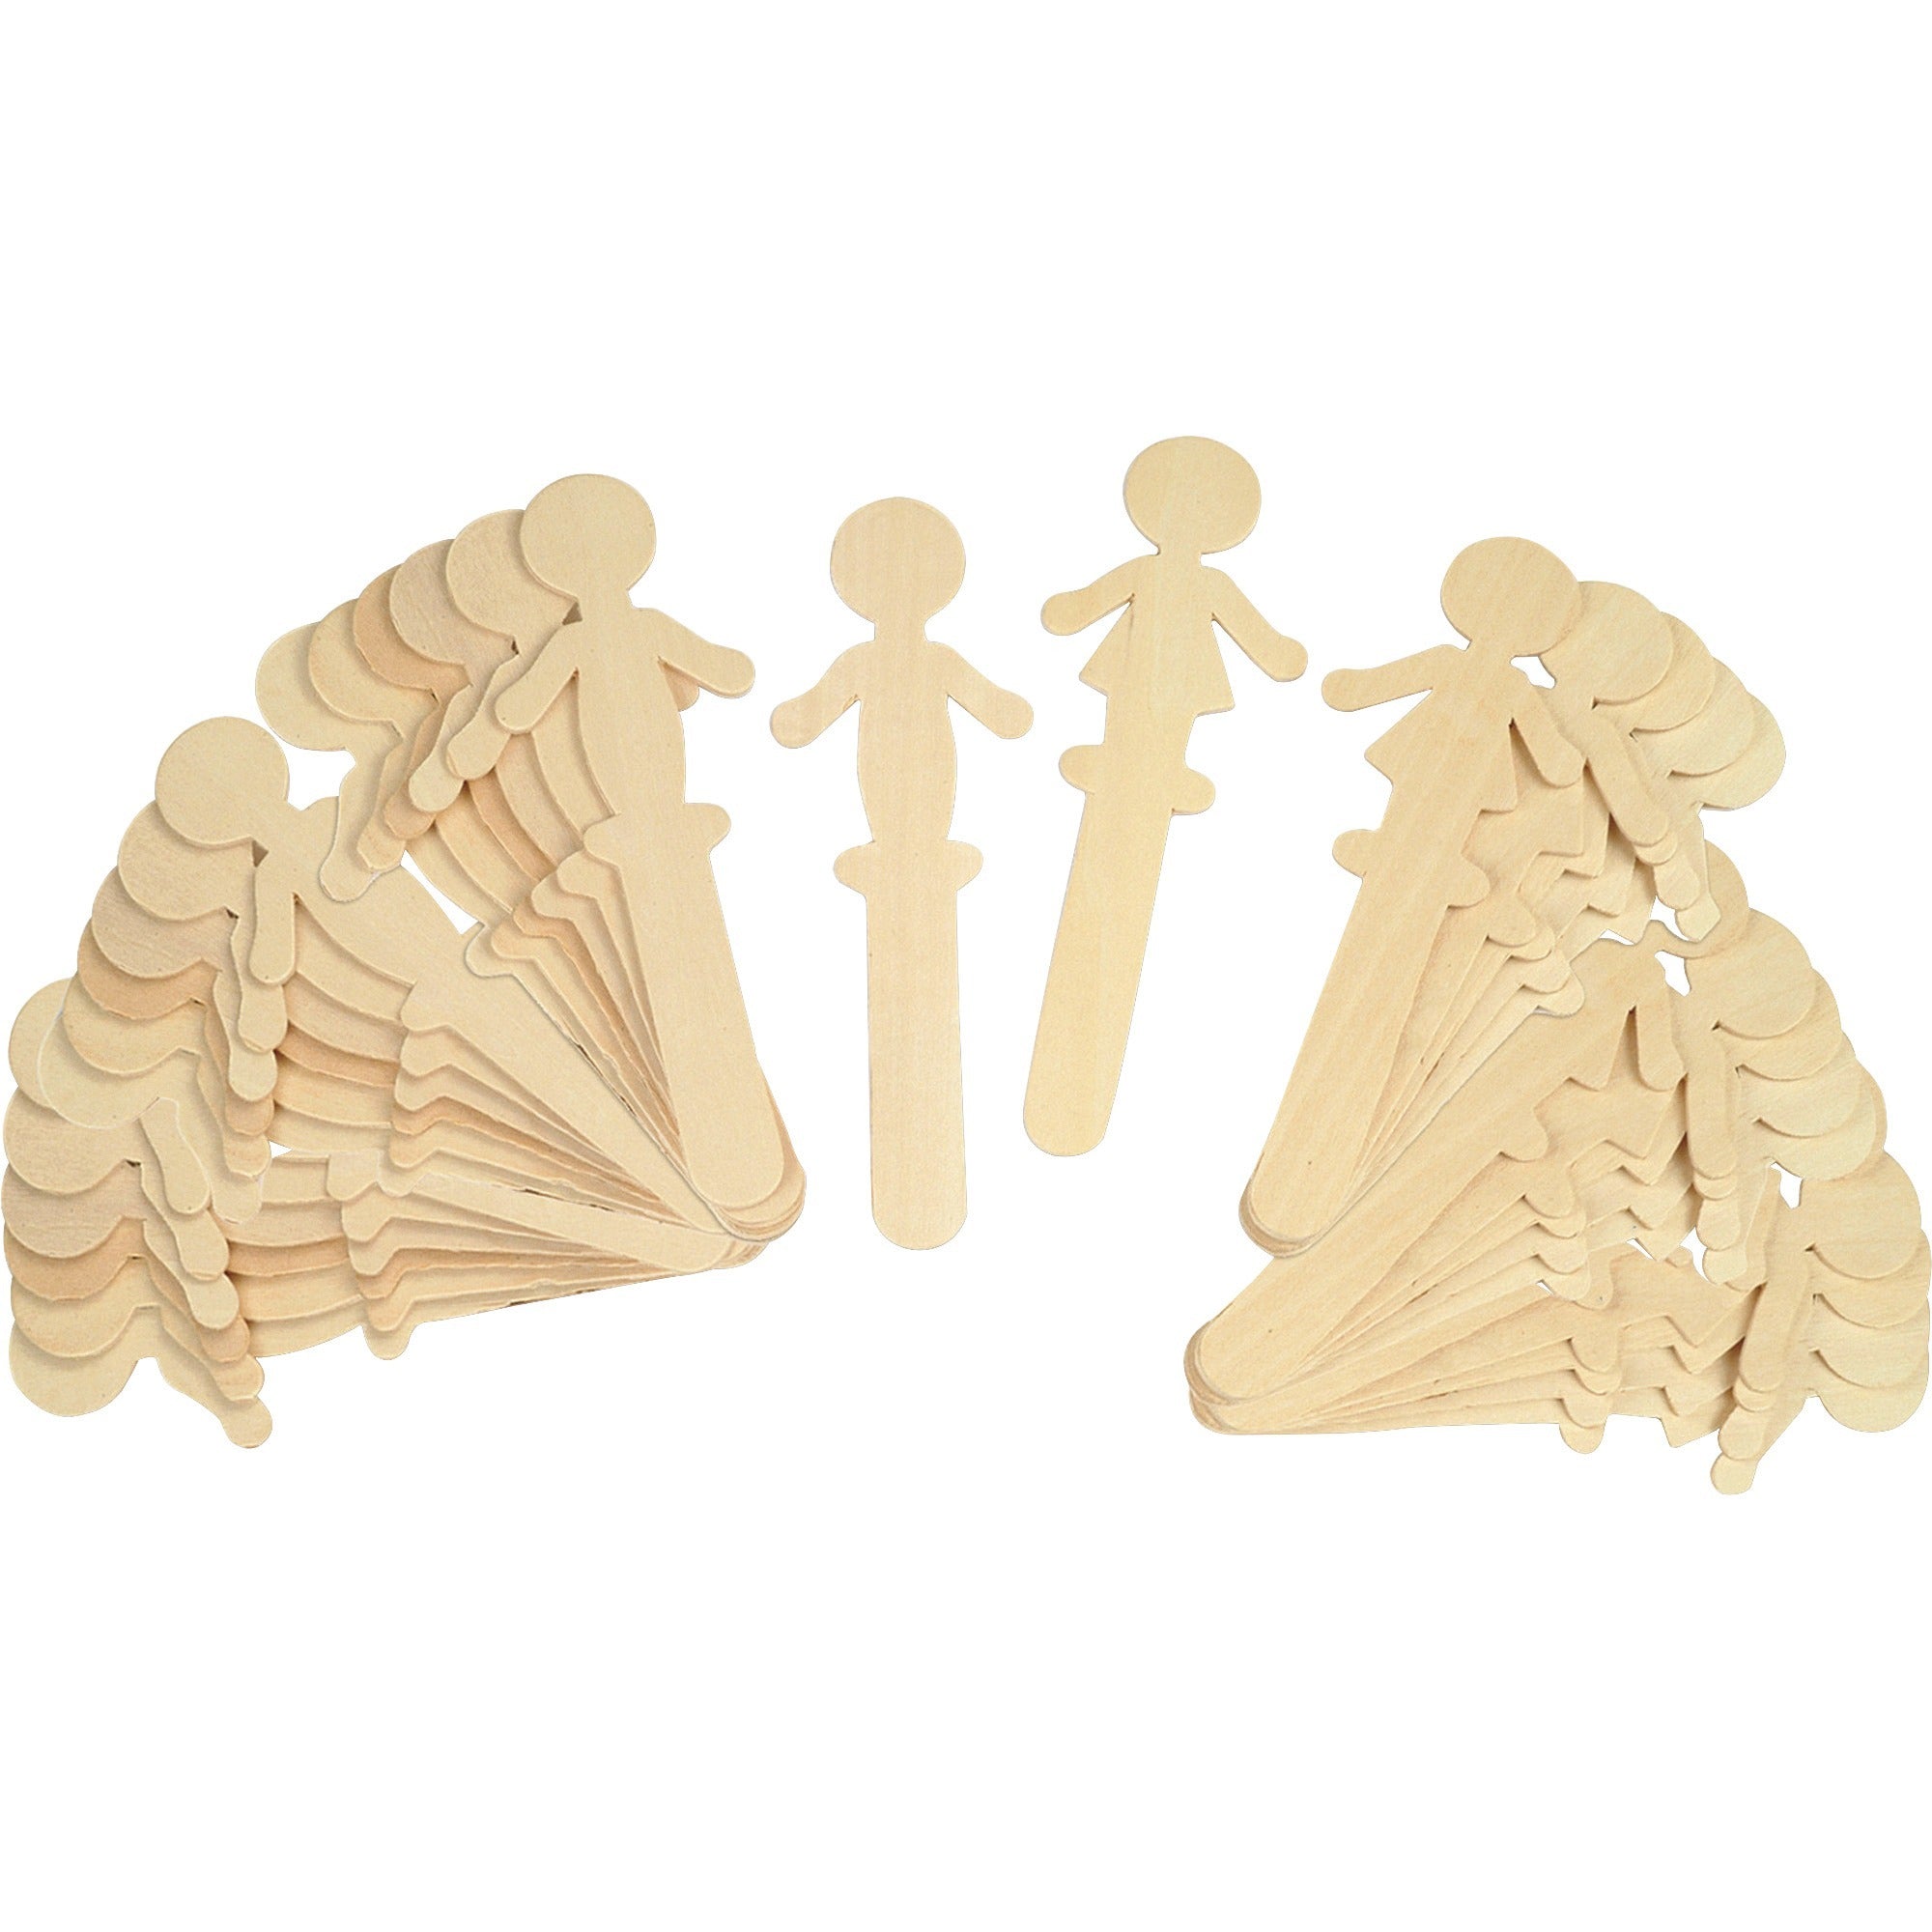 creativity-street-people-shaped-wood-craft-sticks-2height-x-538length-1-pack-natural-wood_pac364502 - 1